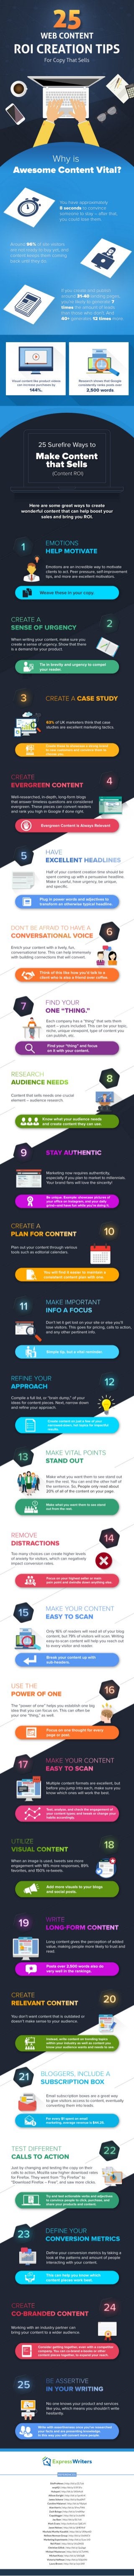 25 Web Content Creation ROI Tips: Copy That Sells (Infographic)